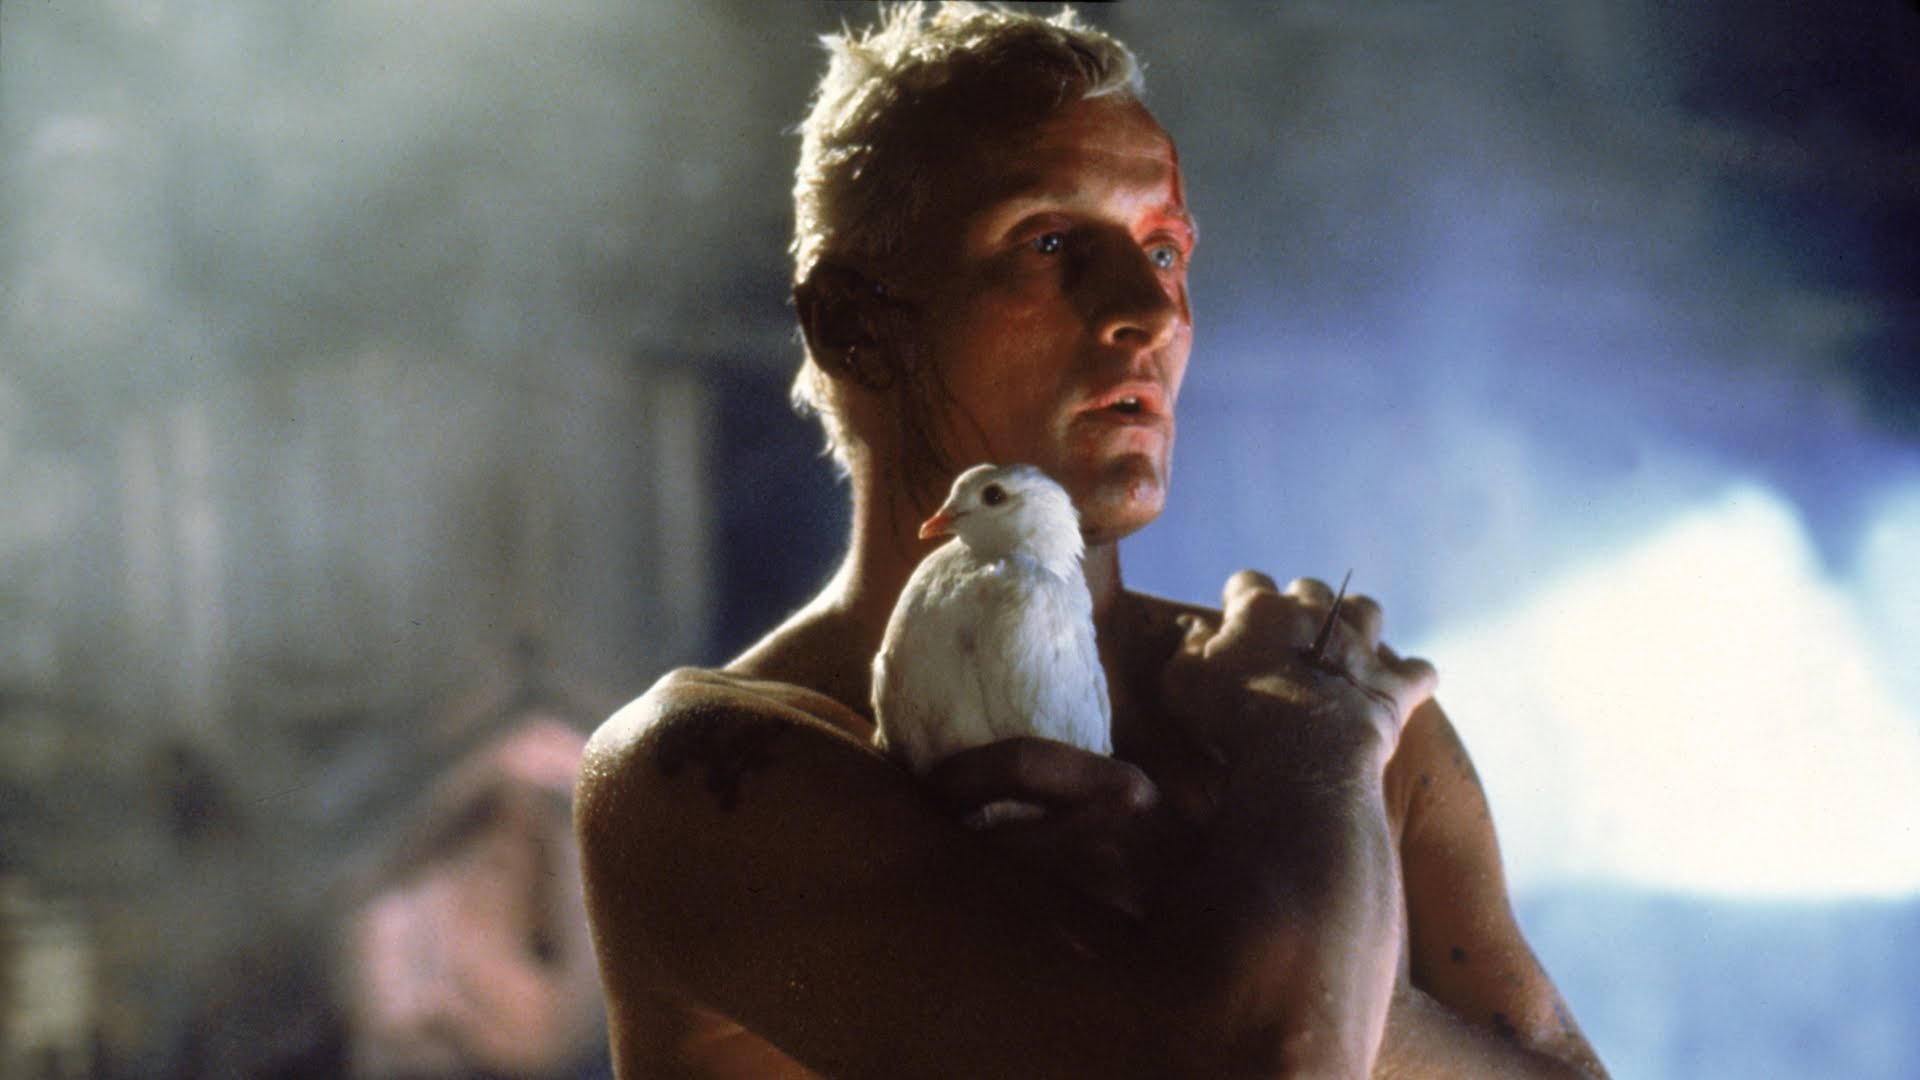 Happy Birthday to Rutger Hauer, who turns 73 today! 